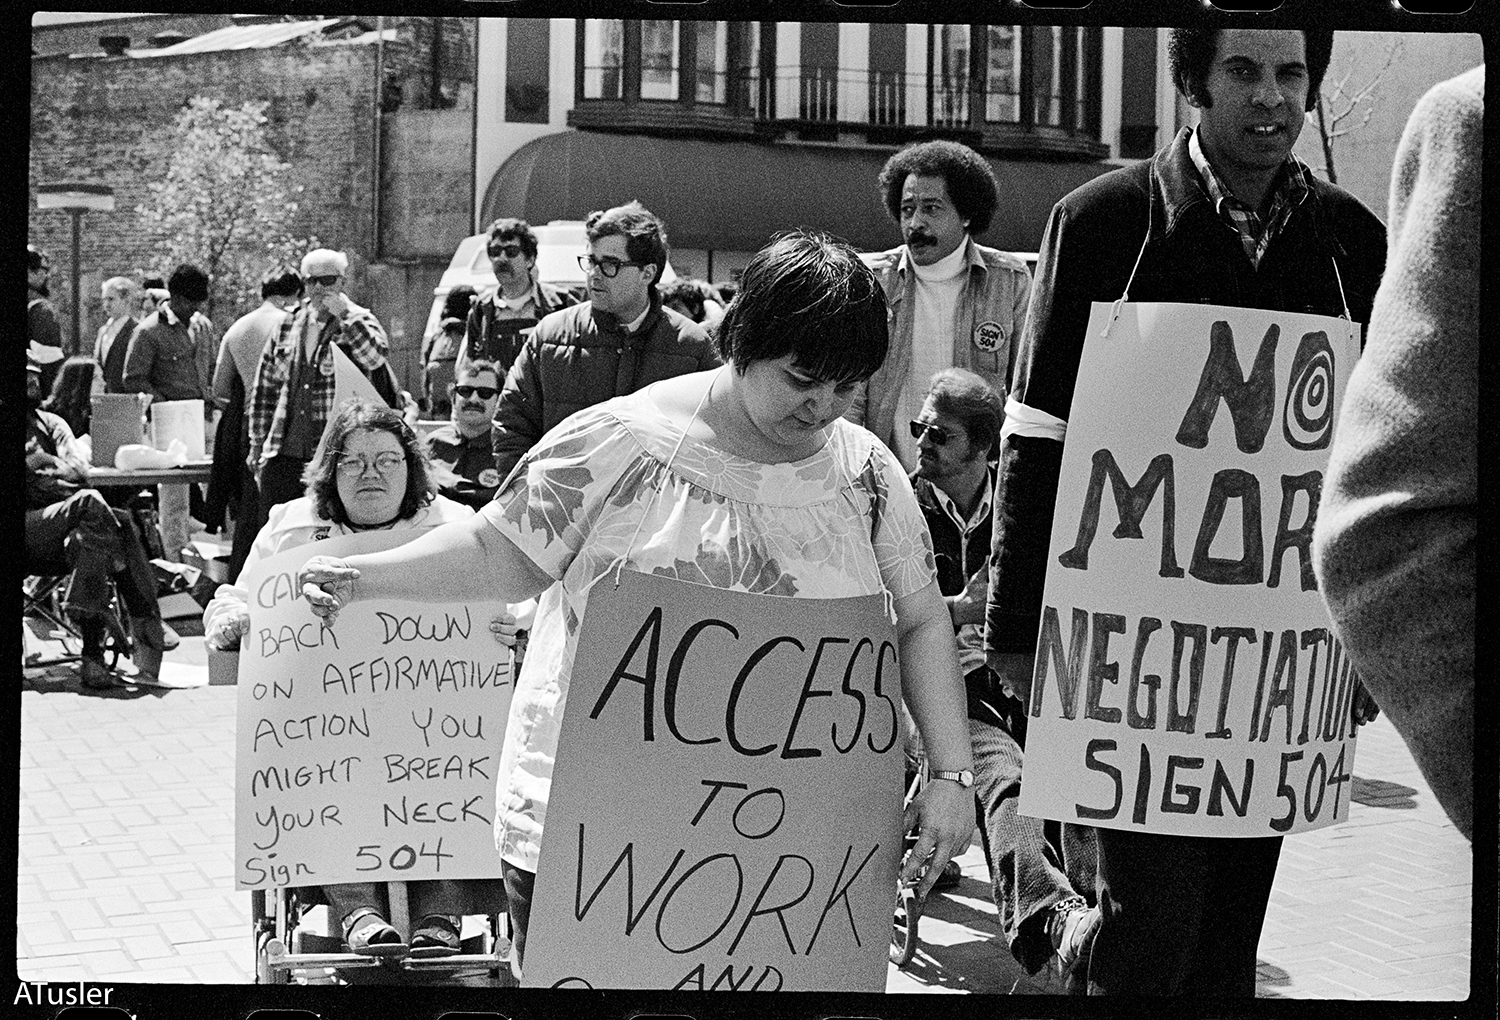 Black and white photo of people demonstrating with “No More Negotiations, Sign 504” and “Access to Work” hand-lettered signs.